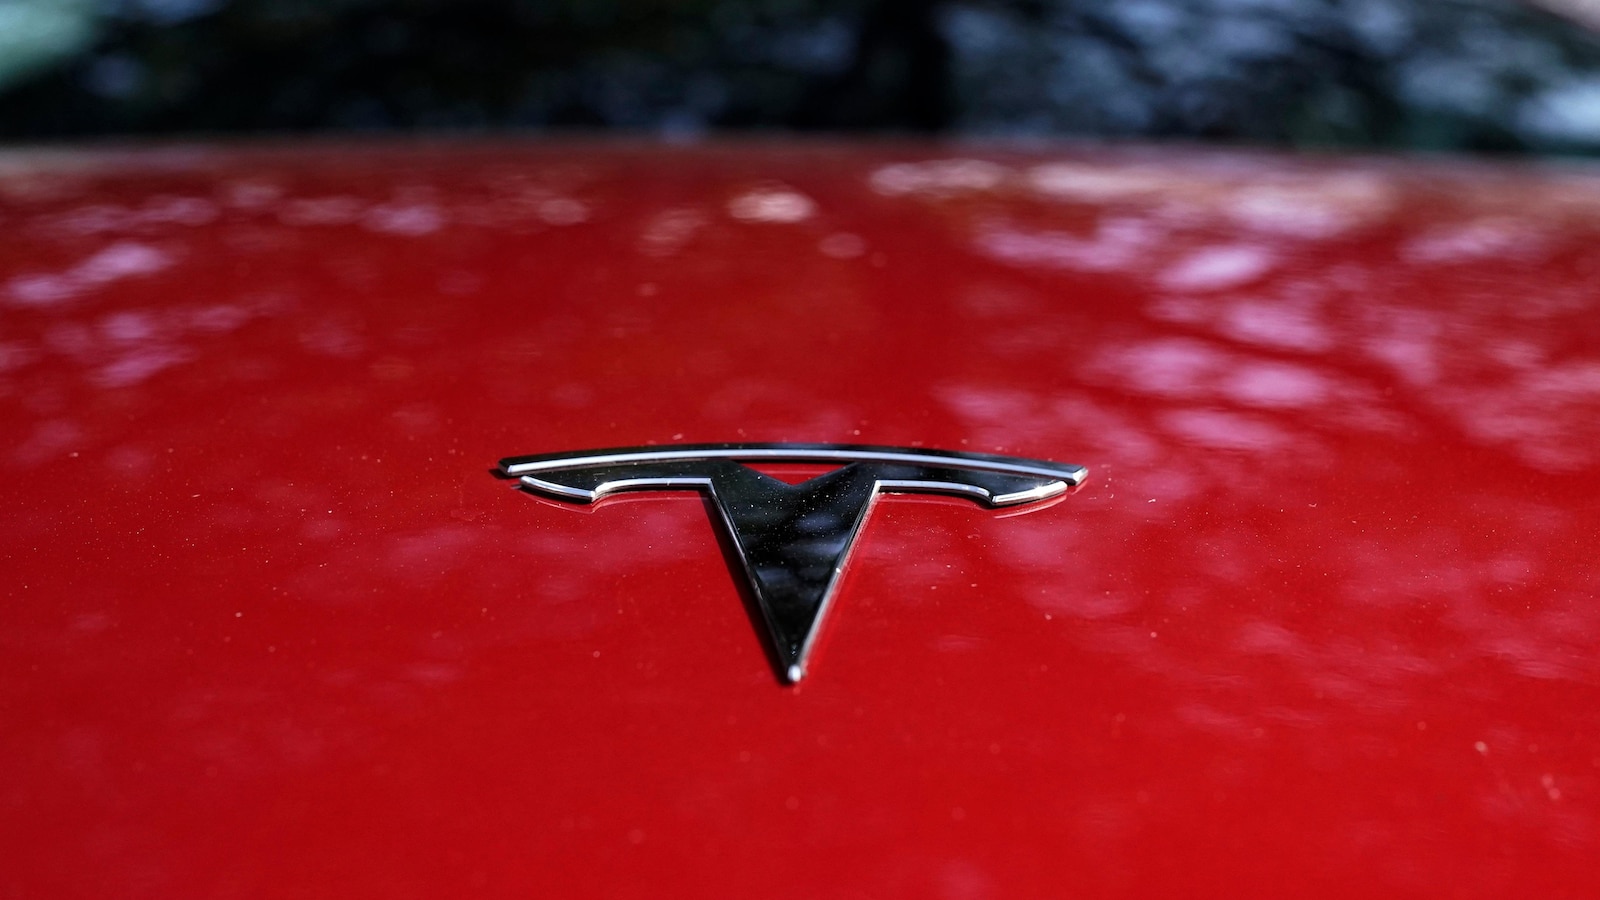 Tesla issues recall for approximately 200,000 vehicles due to software glitch affecting backup camera functionality